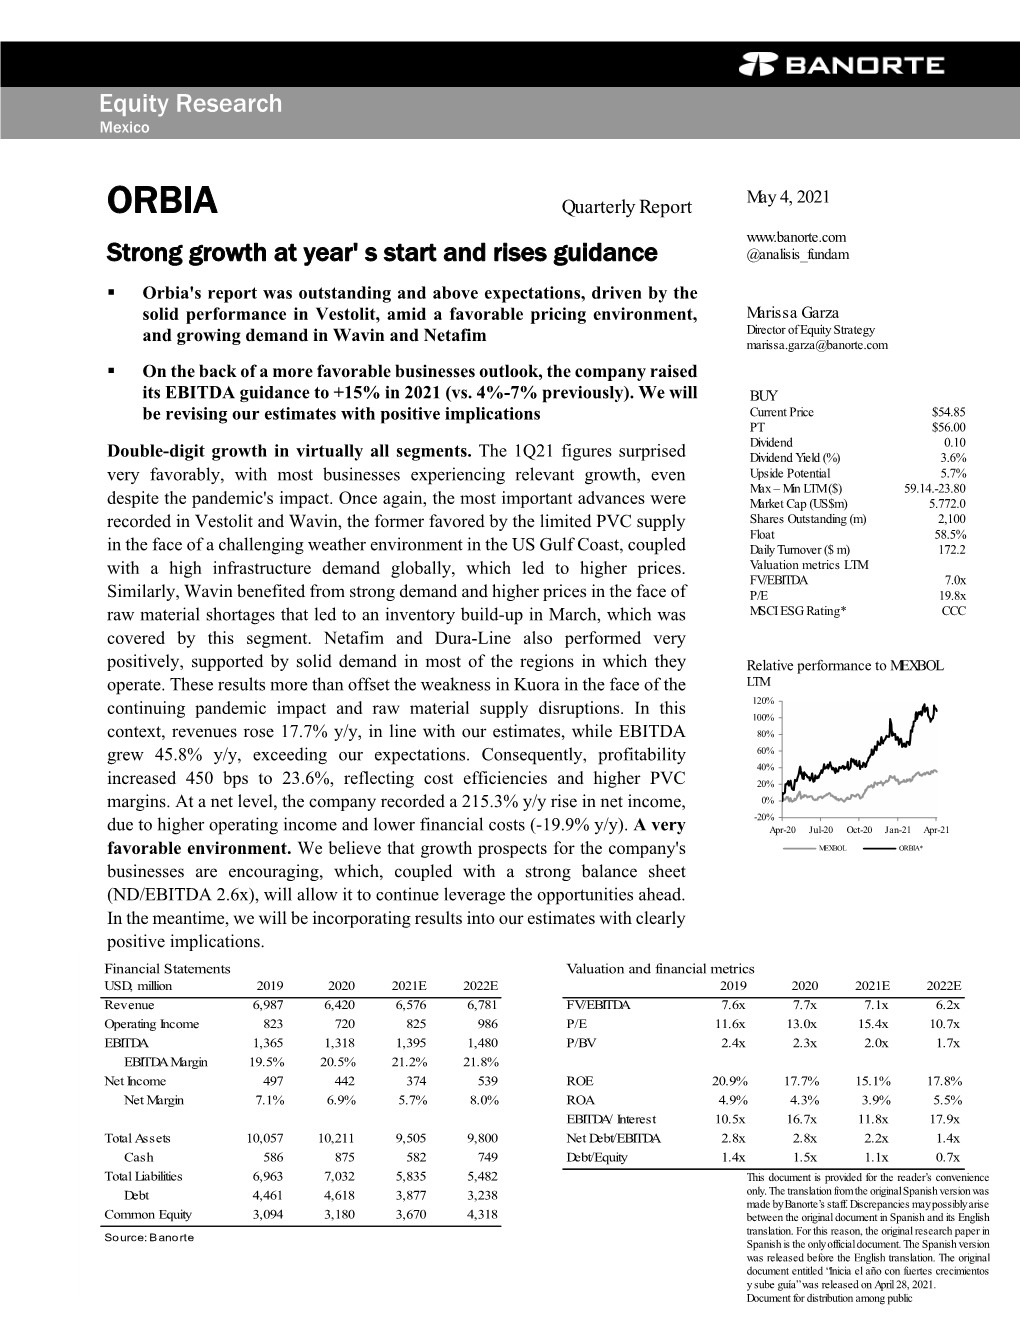 ORBIA Strong Growth at Year' S Start and Rises Guidance @Analisis Fundam